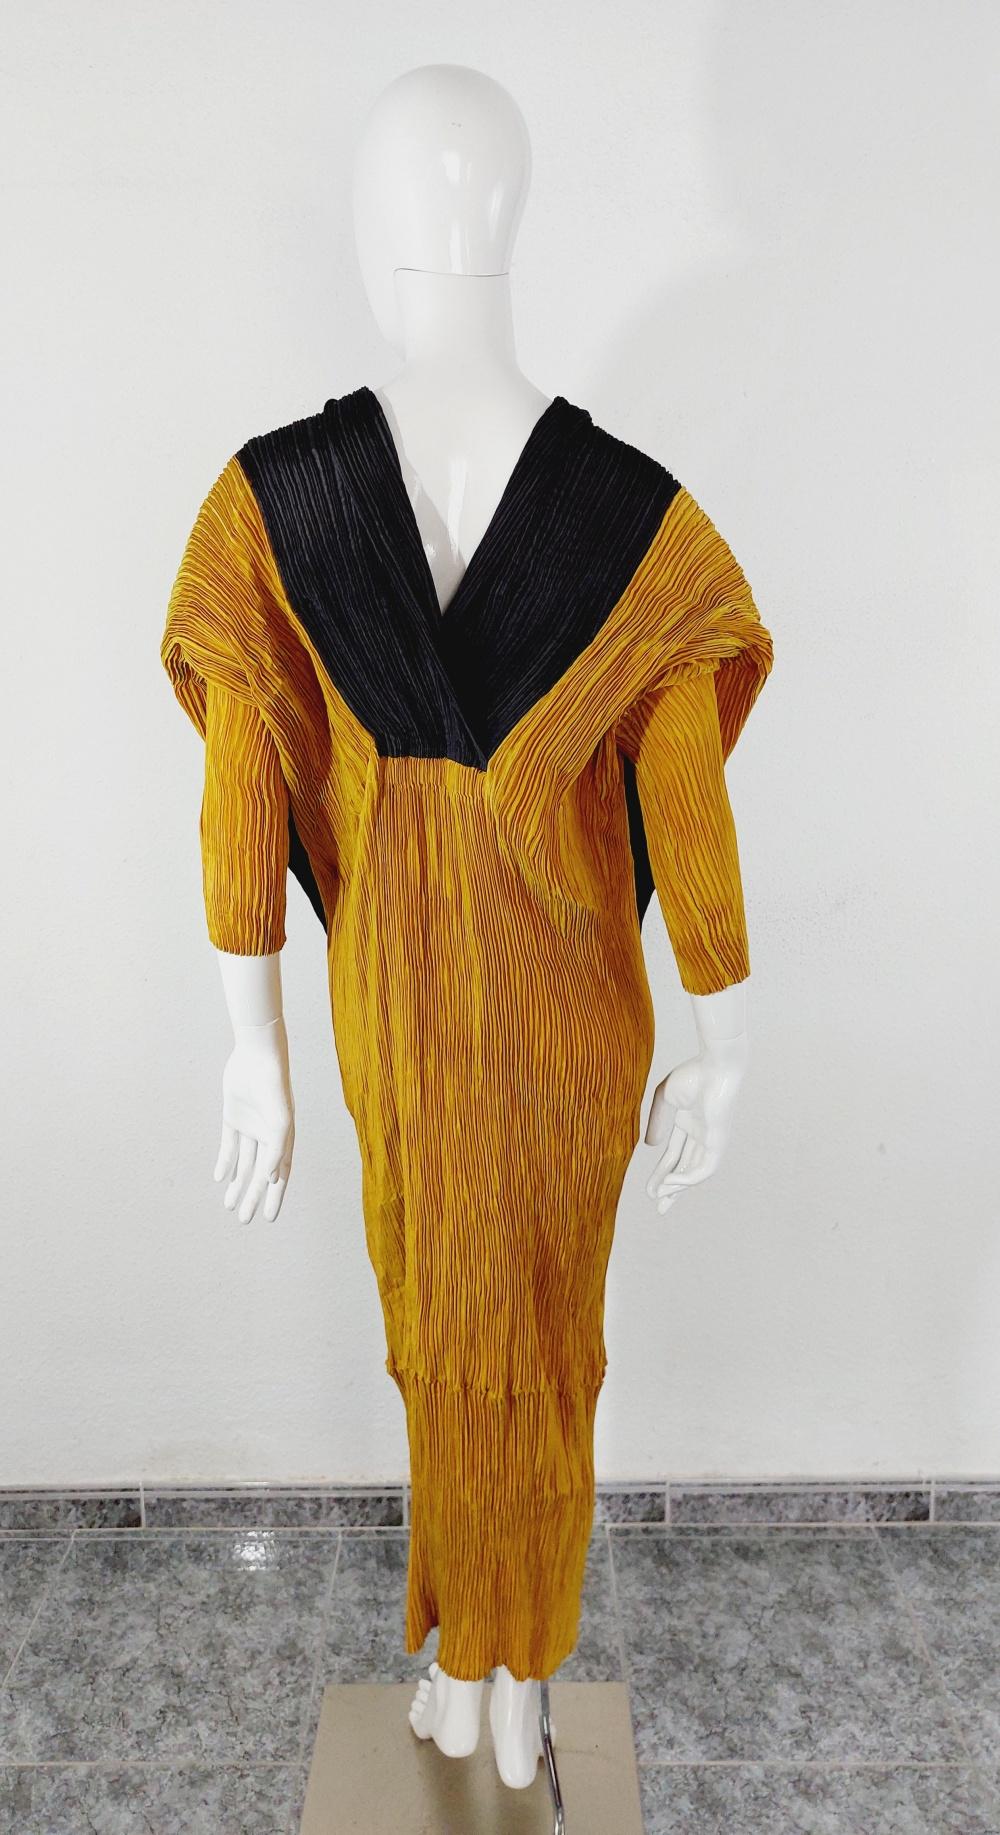 Issey Miyake Gown Couture Huge Collar Runway Dramatic Sculptural Wedding 80s 90s Yellow Brown Vintage Evening Pleats Please Pleated Maxi Dress

Wonderful gown dress by Issey Miyake!
Unique silhouette!
Huge collar!
You can variate the collar, the